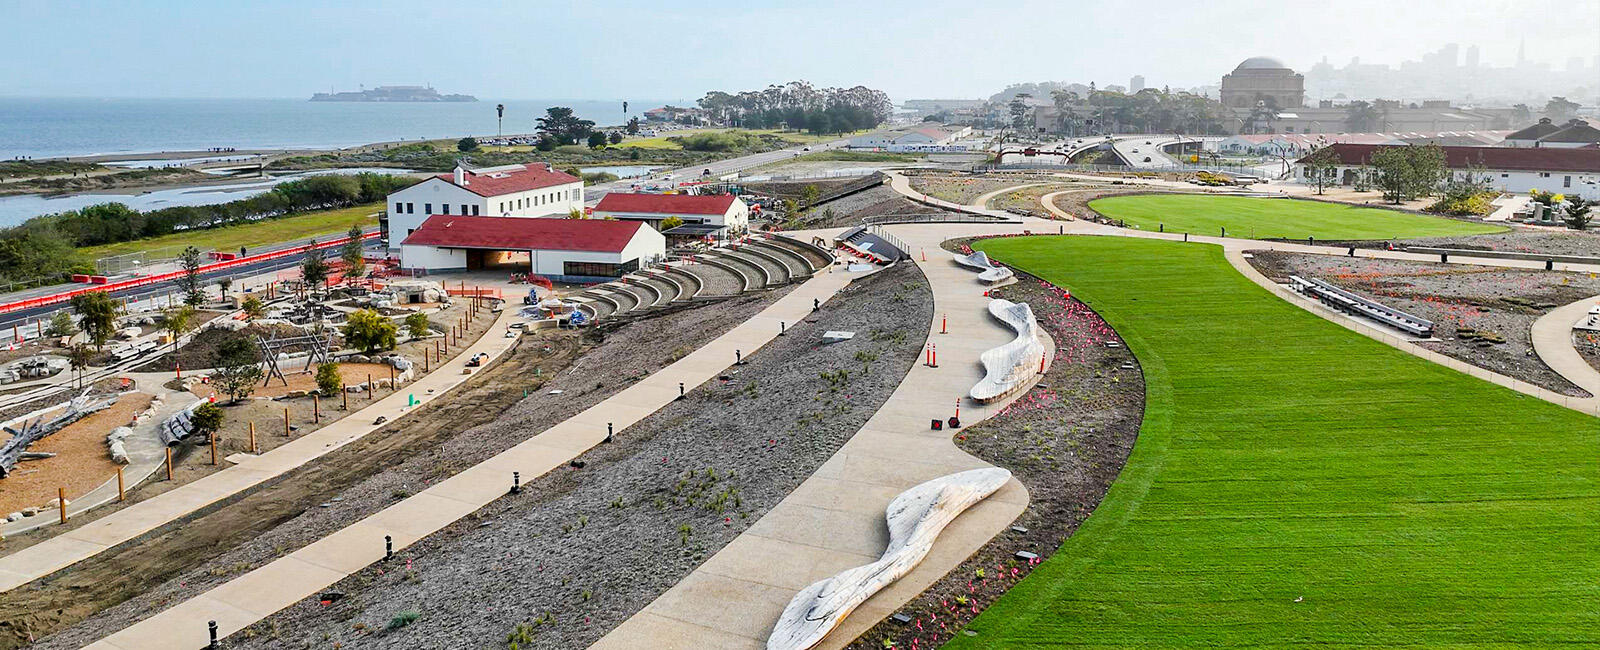 Green lawns, pathways, and buildings at the Presidio Tunnel Tops site.